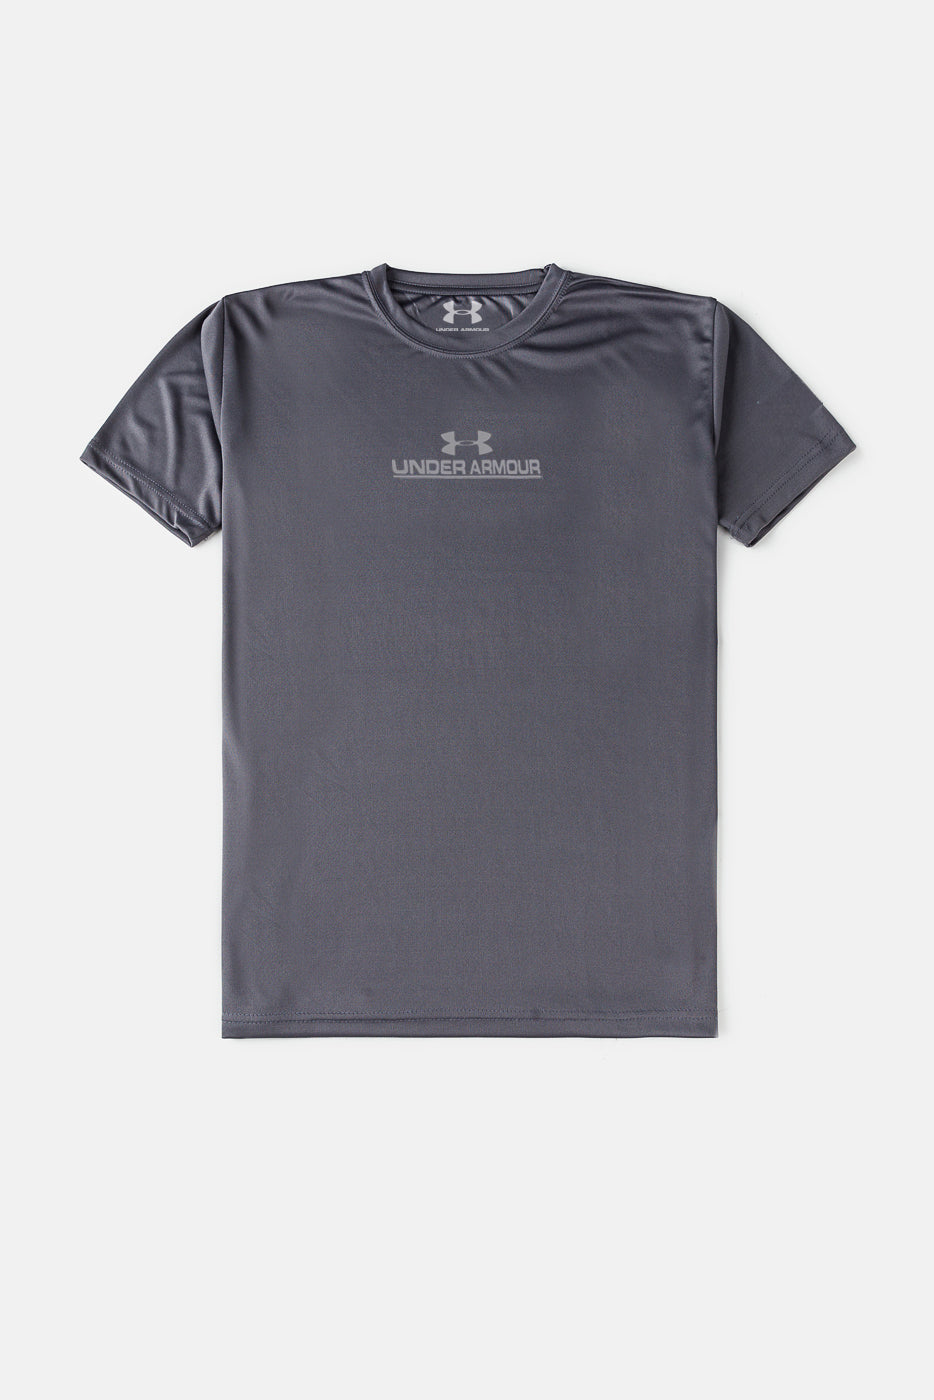 Steel Gray Under Armour Front Logo Dri-FIT T-Shirt